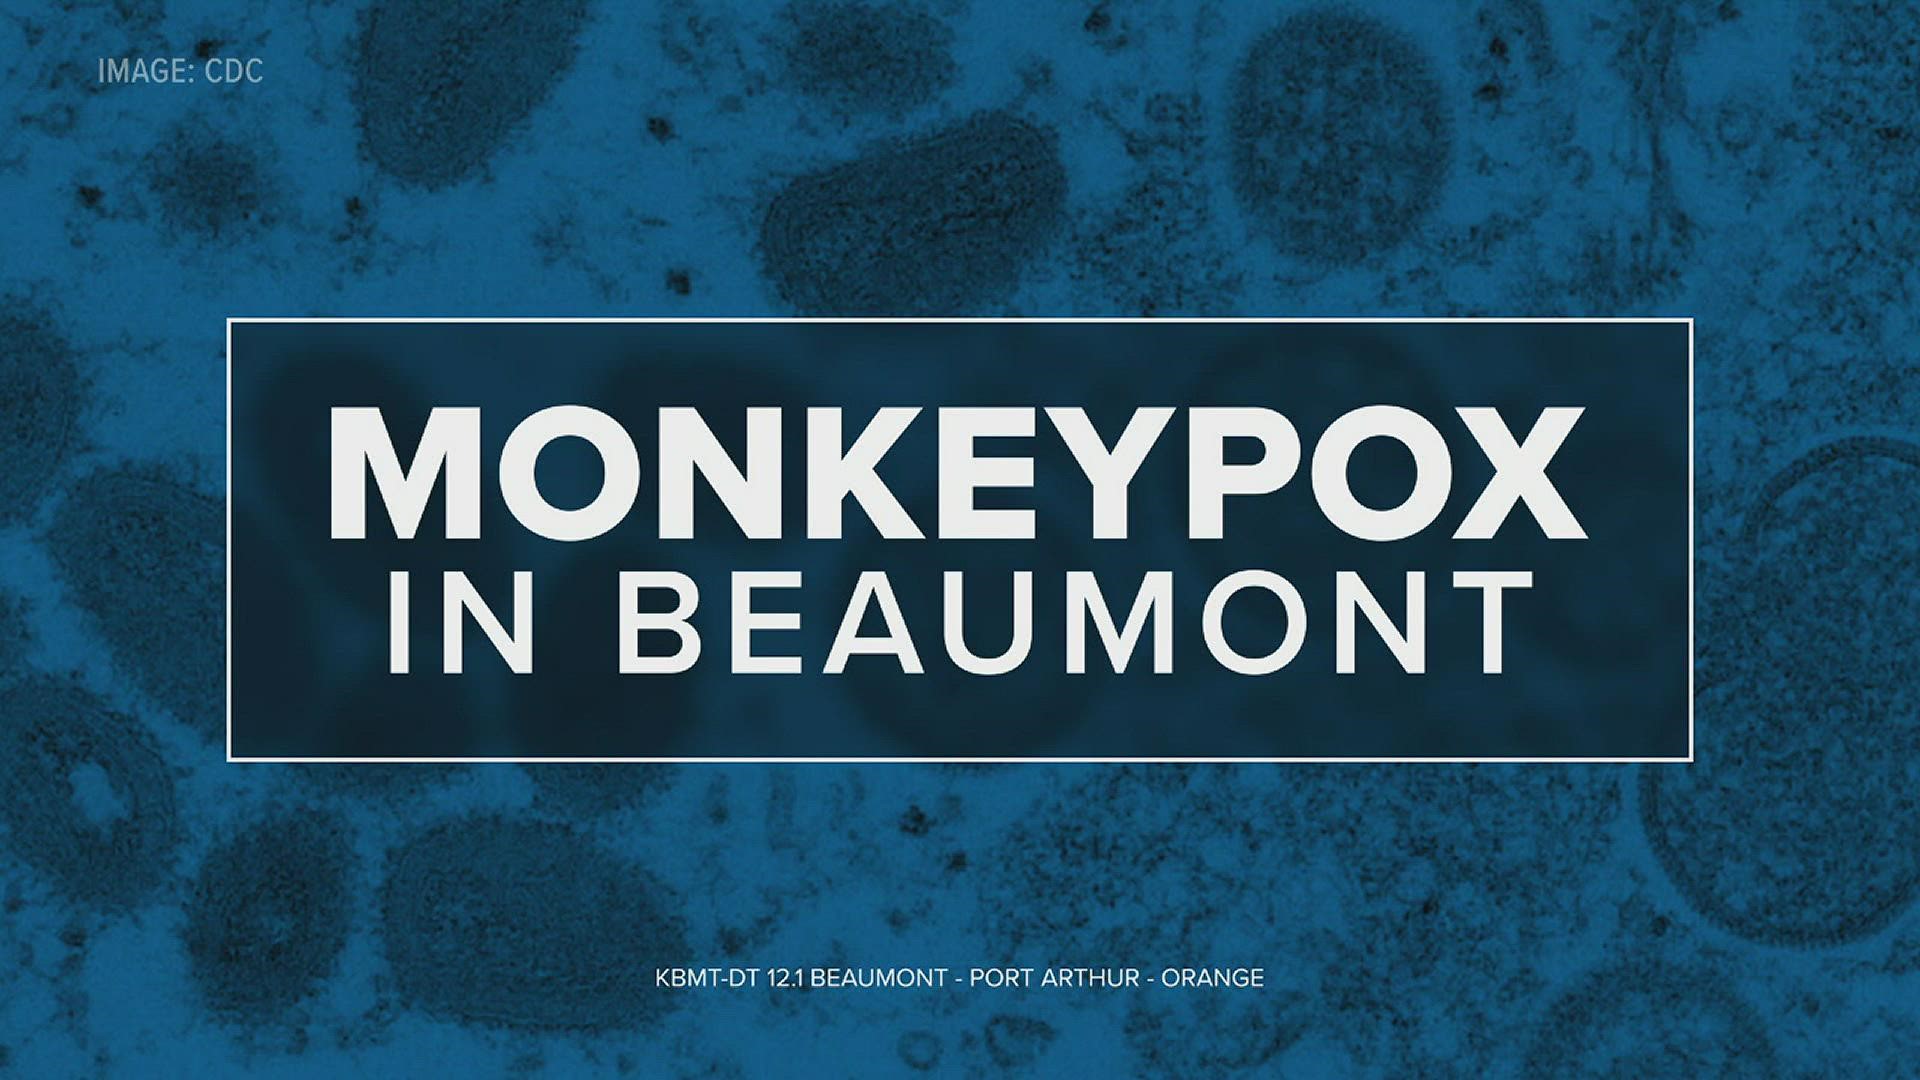 The City of Beaumont Public Health Department has announced the first case of Monkeypox documented in the city.